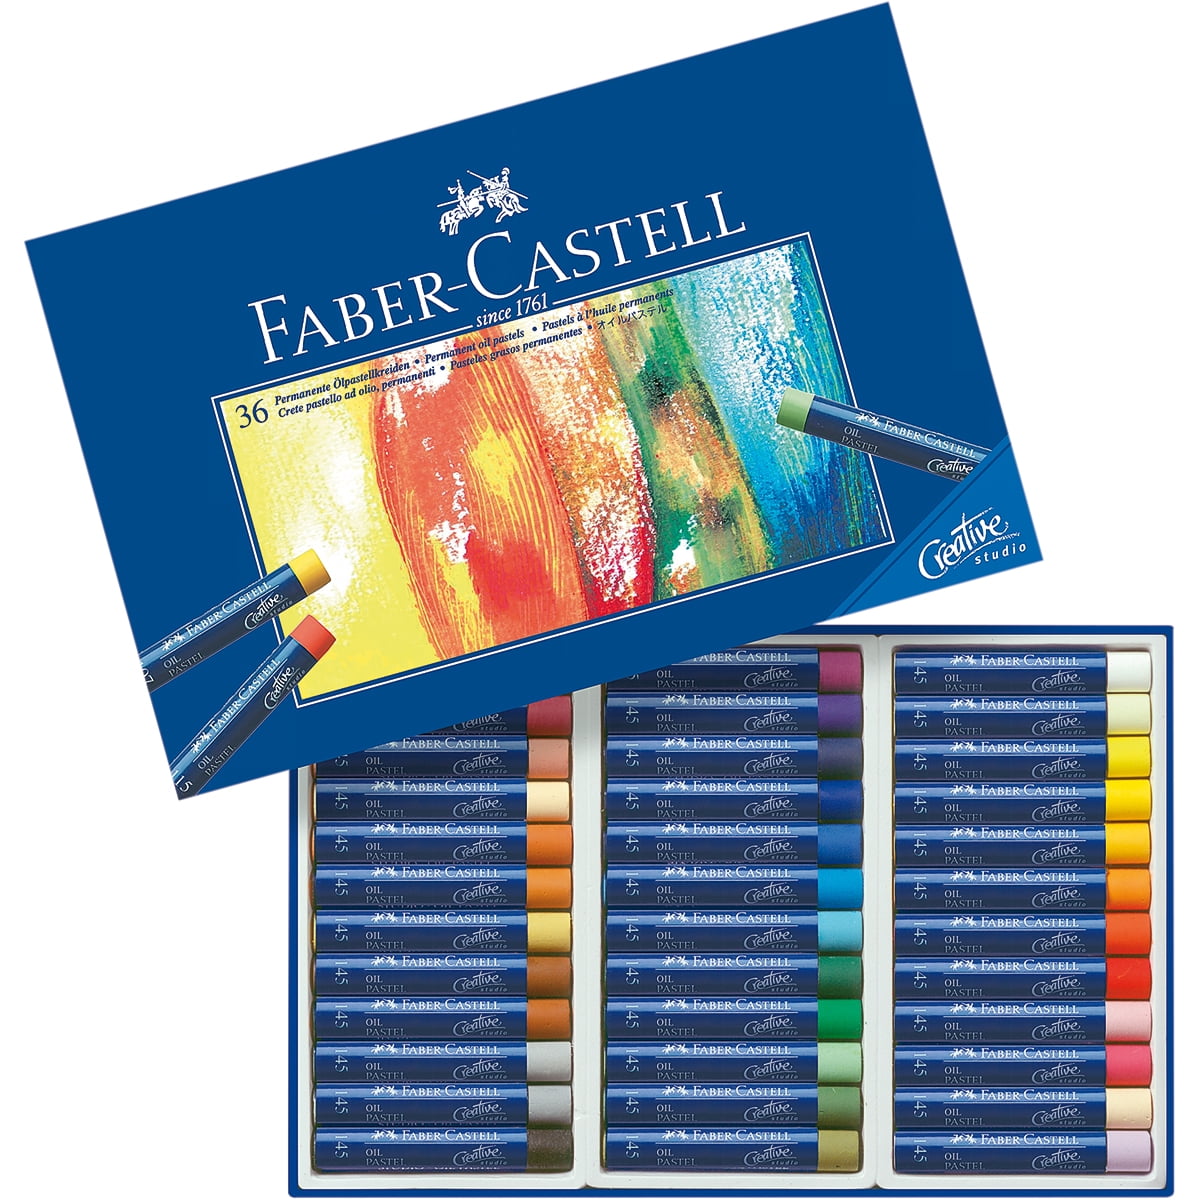 Faber-Castell Oil pastel crayons - Live in Colors